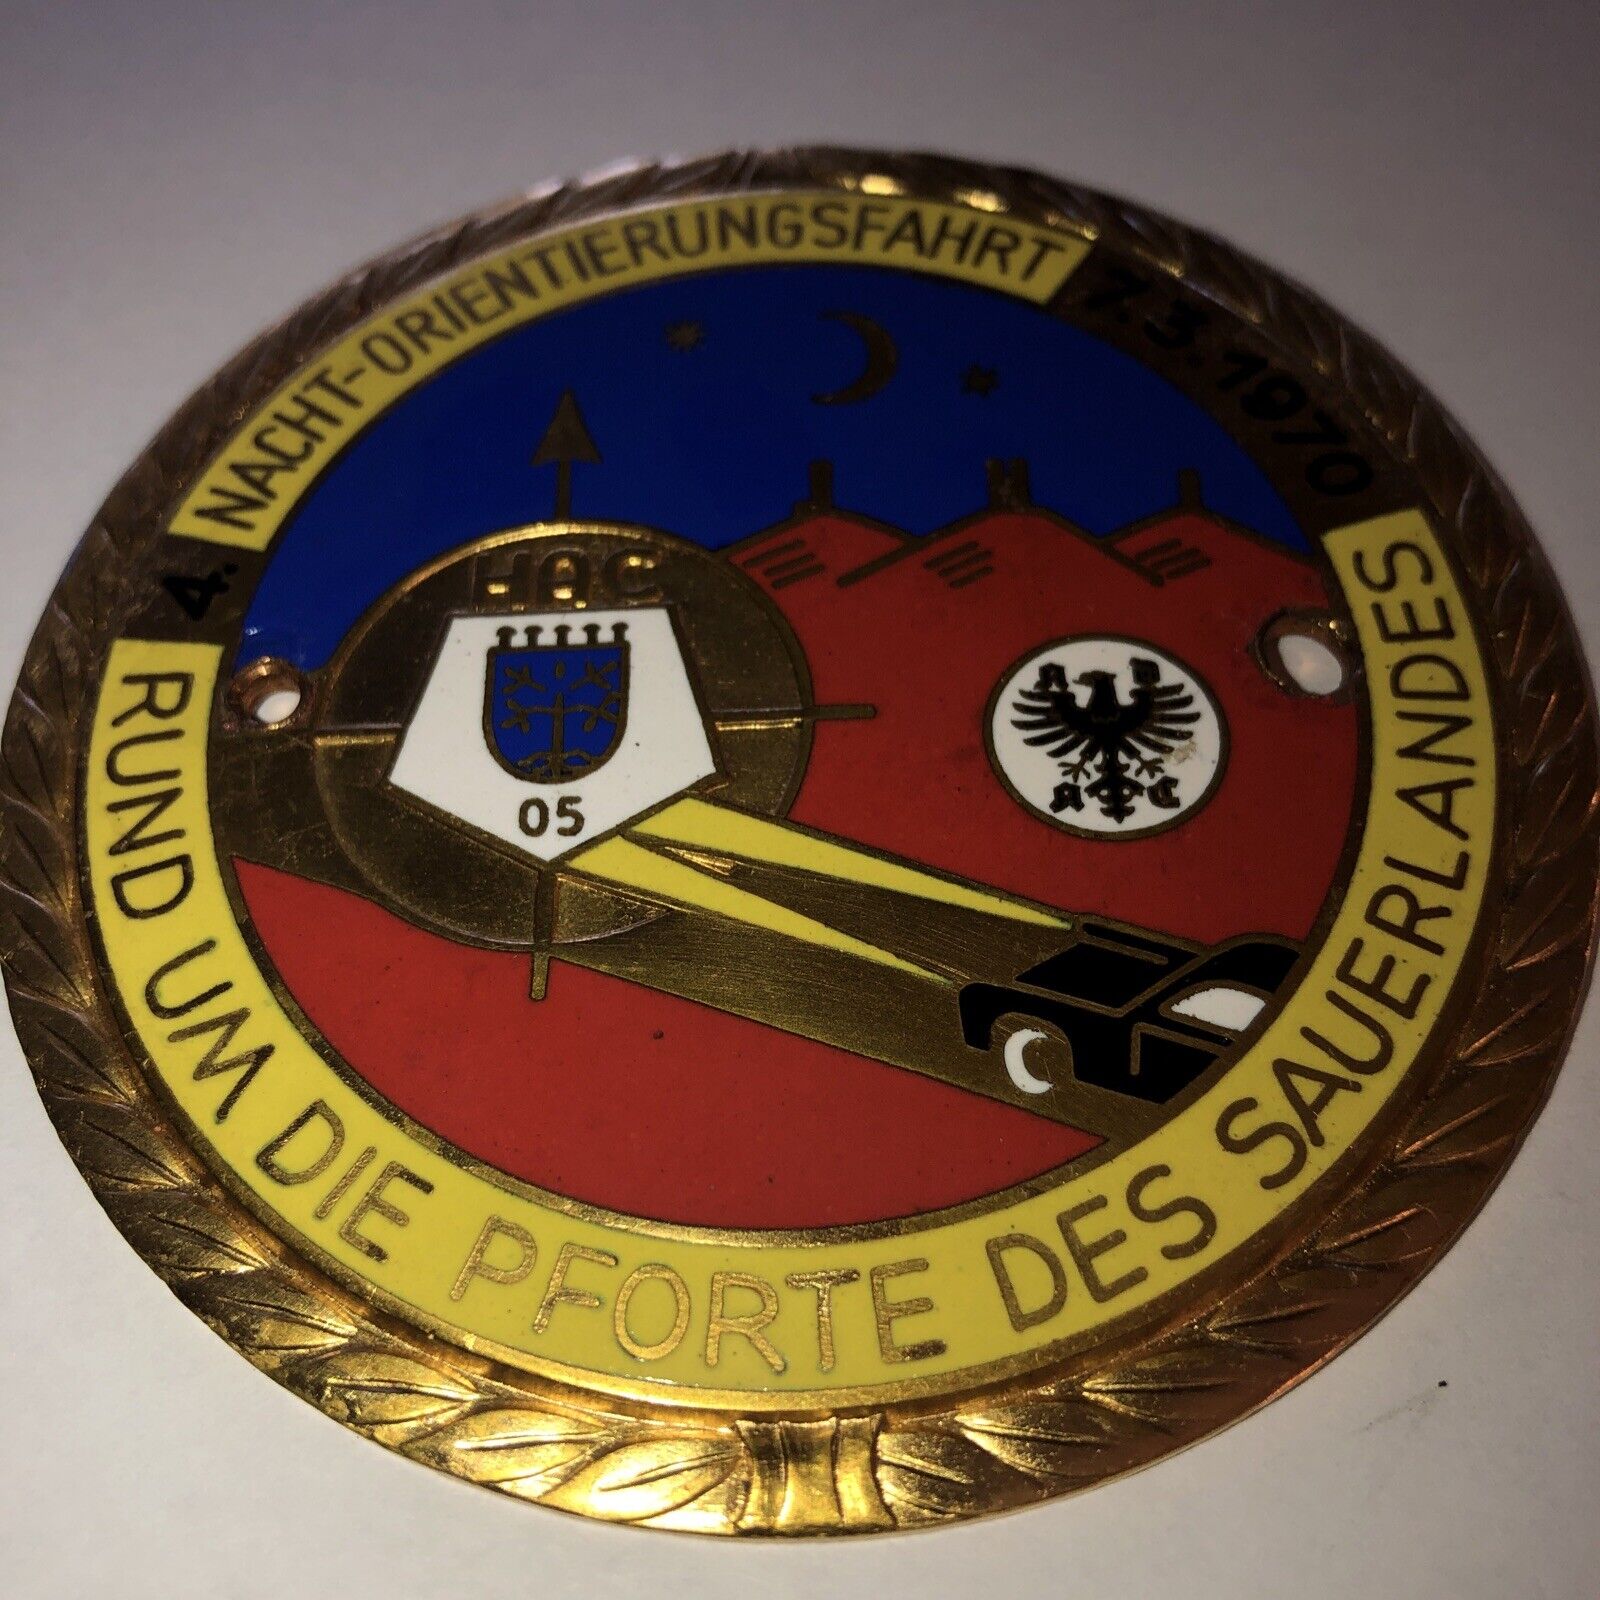 Rare Awesome grill badge 1970 Nacht orientieringsfahrt German